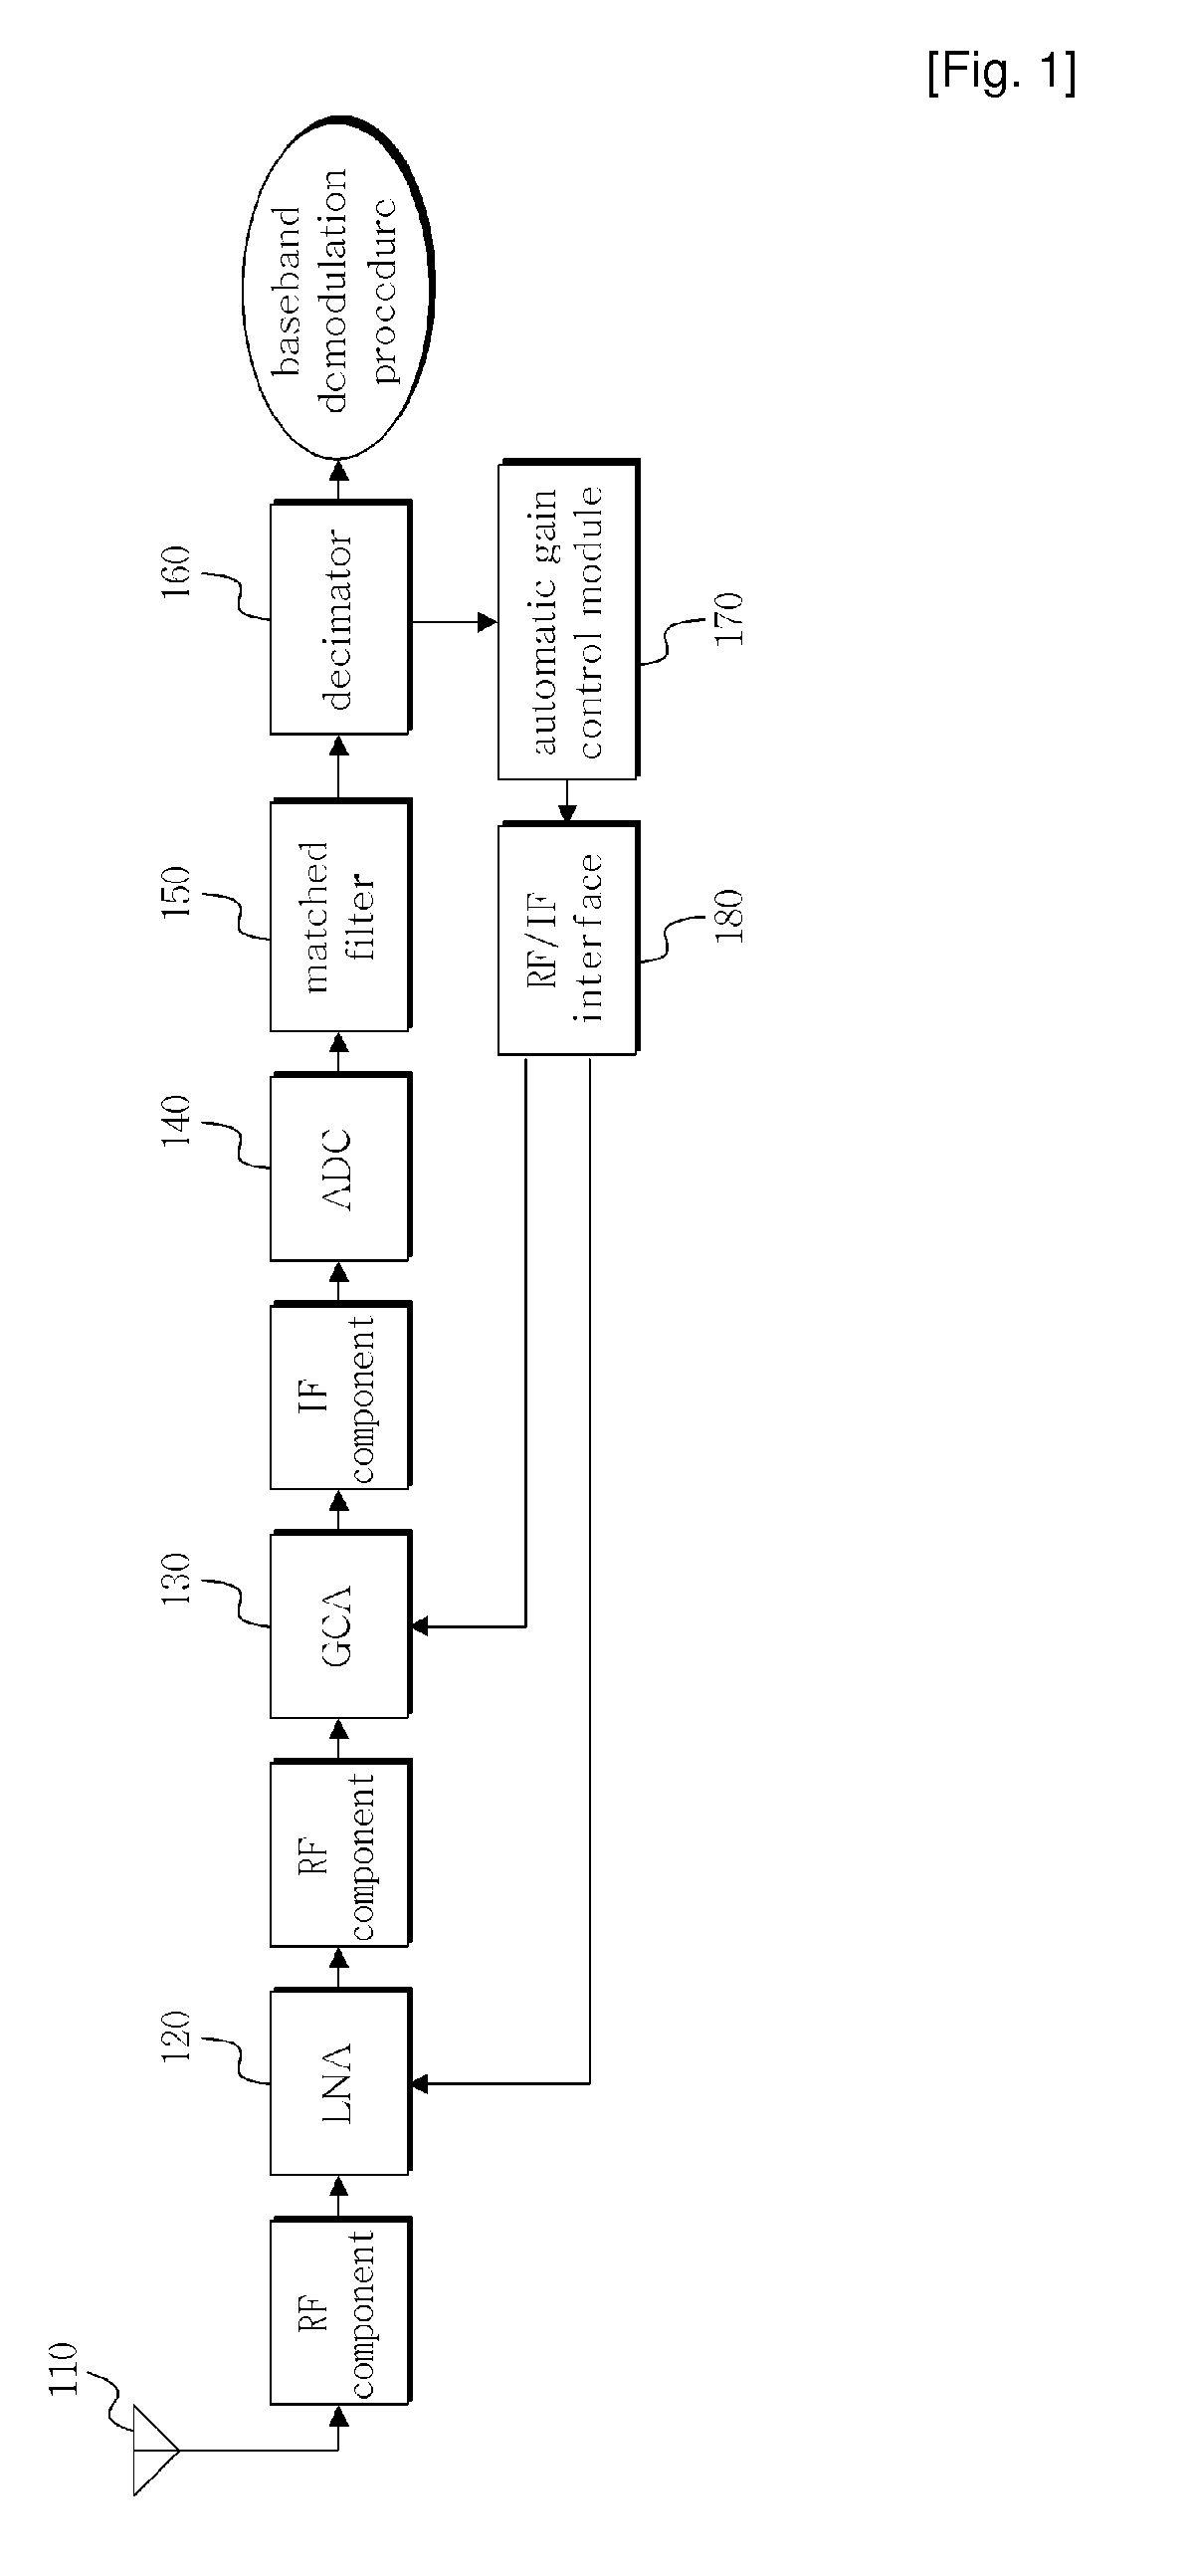 Automatic Gain Control Apparatus and Method in Wireless Telecommunication System